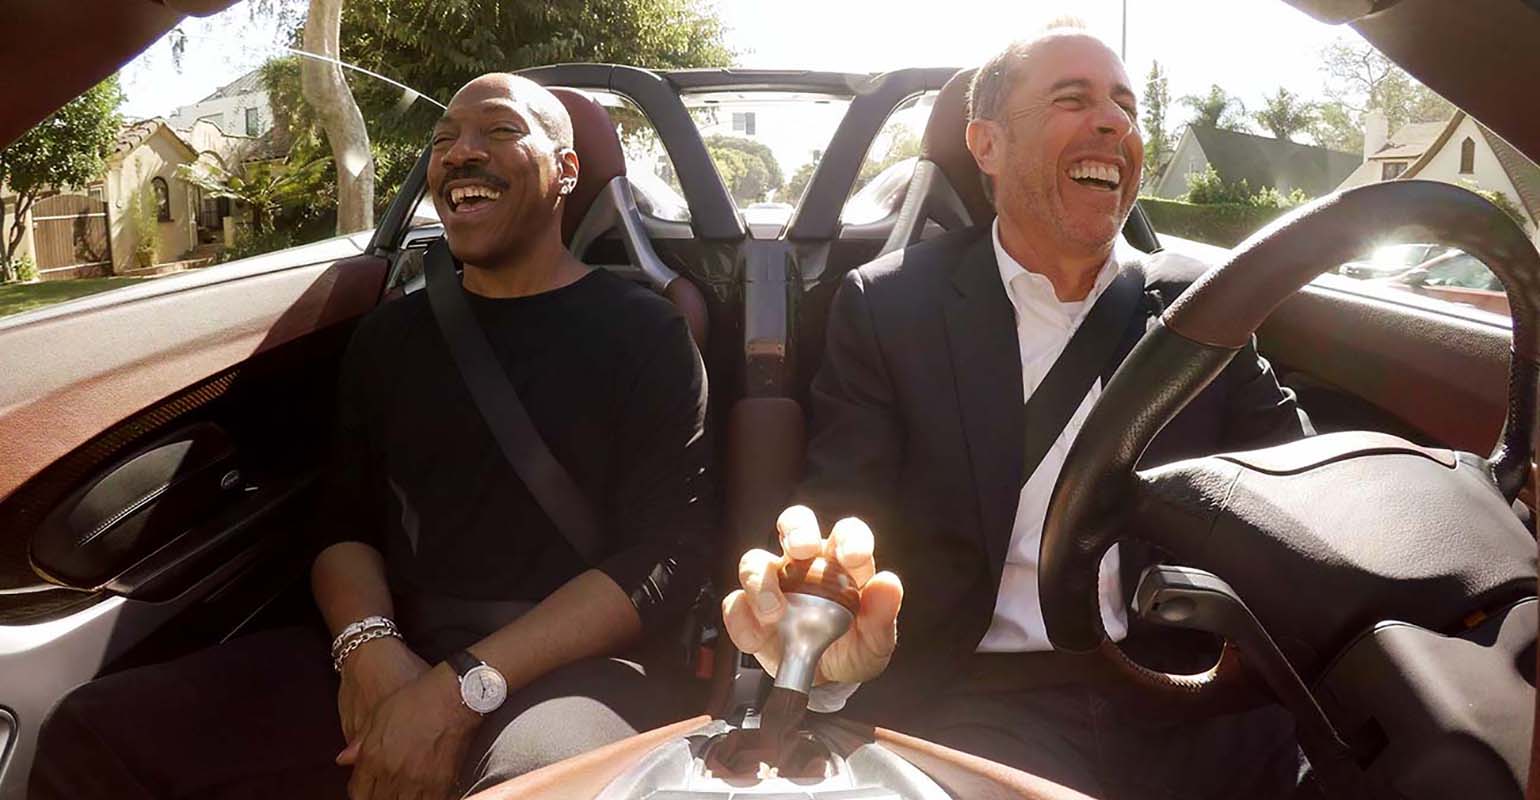 Financial Advisor Tips from Comedians in Cars Getting Coffee